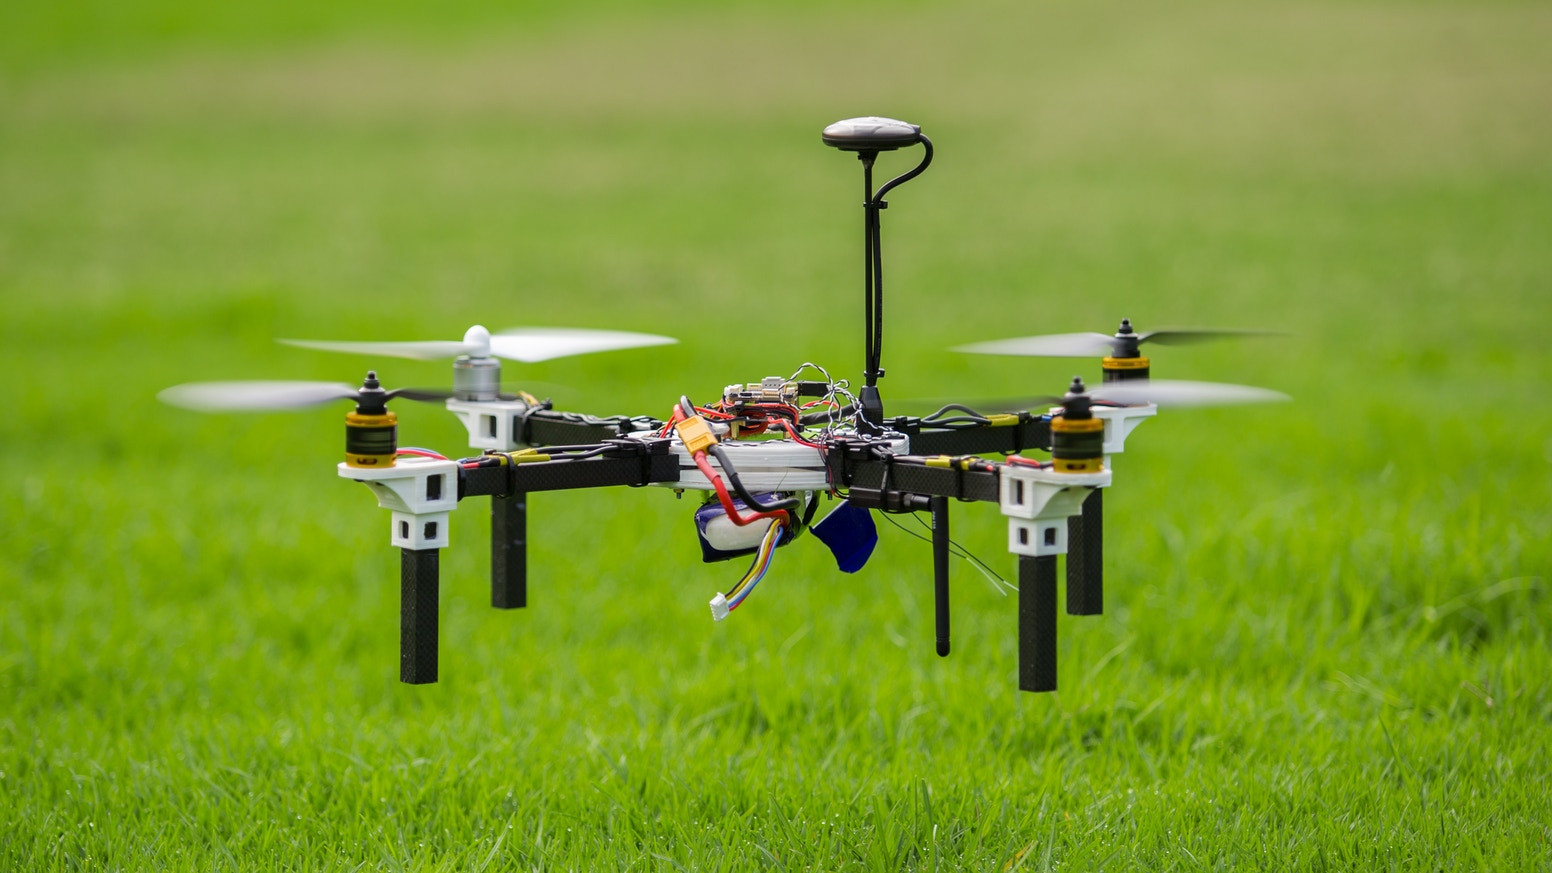 DIY Drone Kit
 H4WK DIY Drone Kit Build & Fly Your Own Quadcopter by